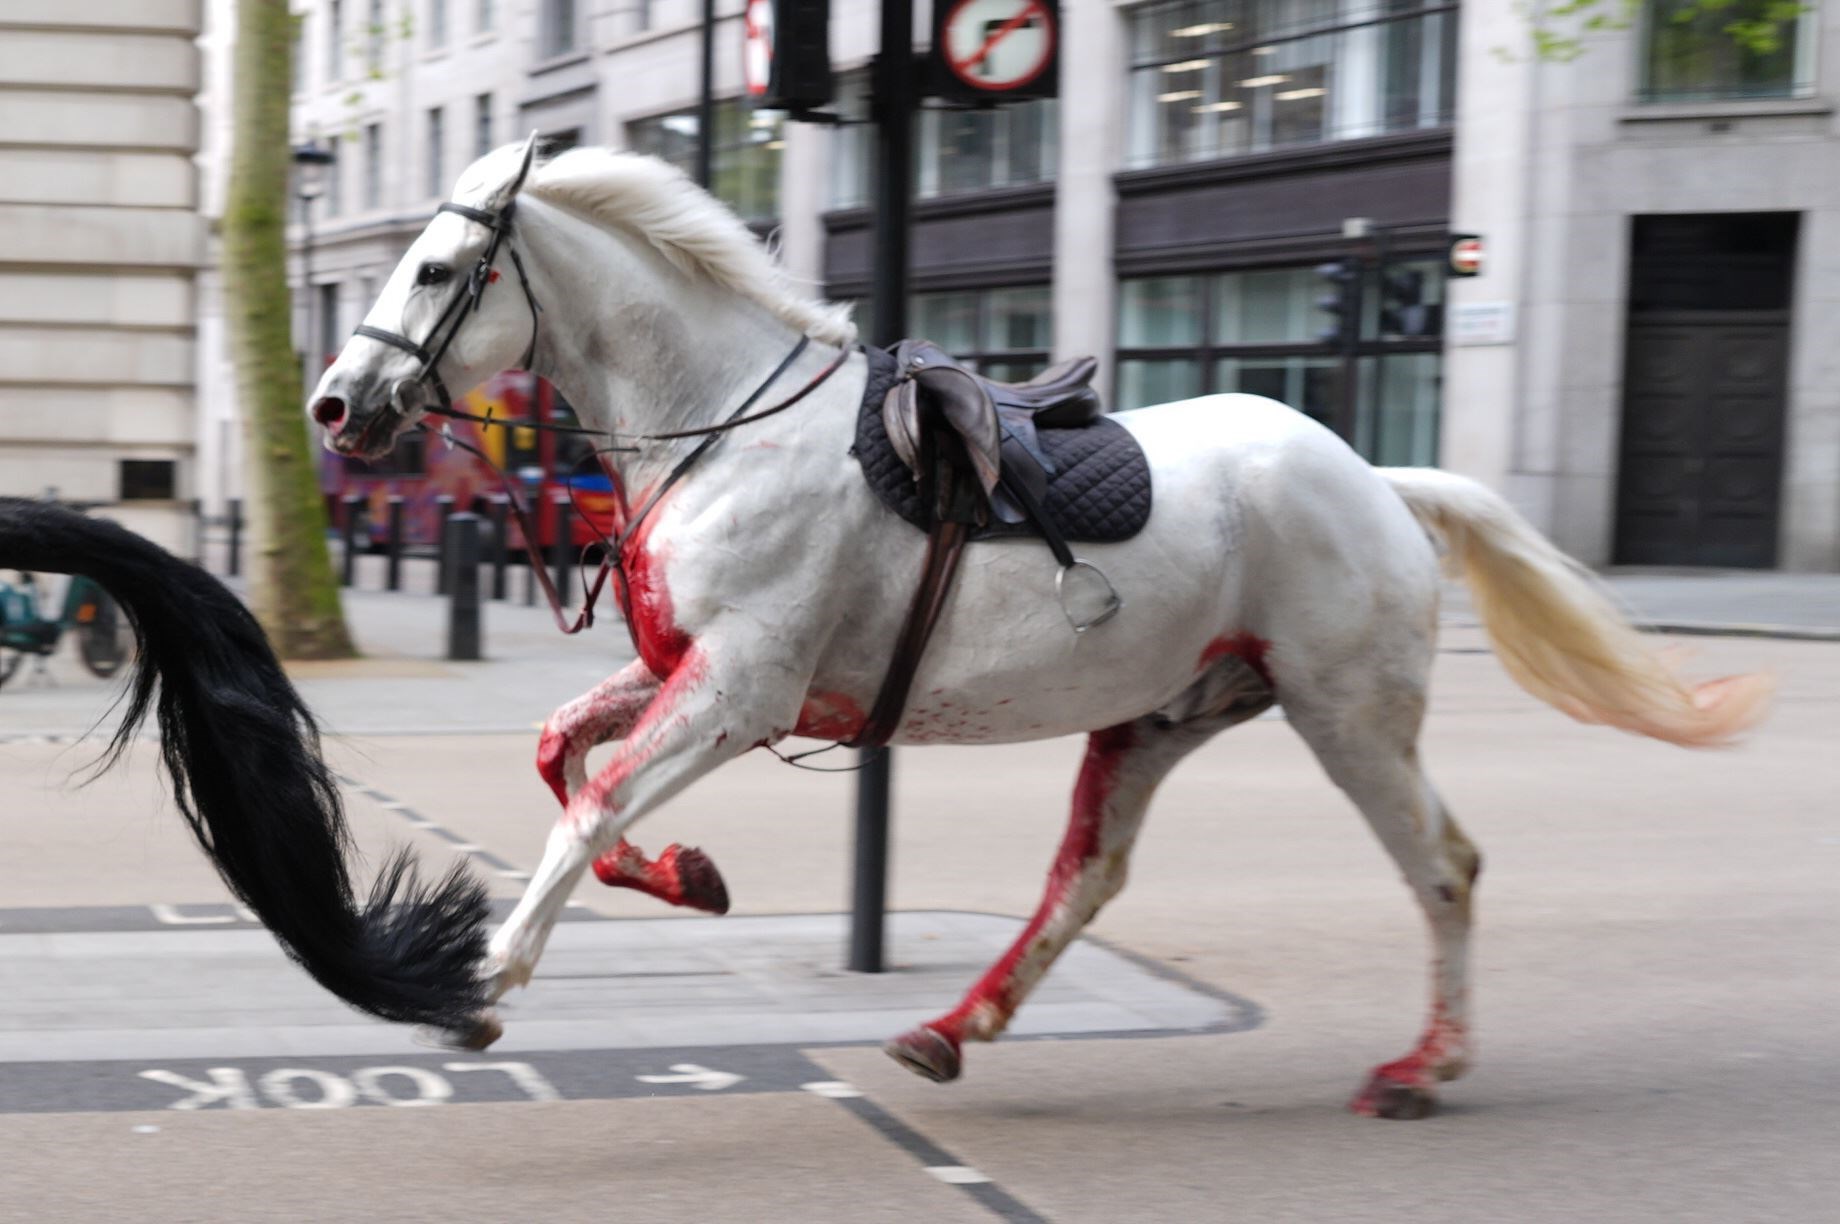 Two of the animals, a black horse and a grey drenched in blood, were seen galloping through central London(Jordan Pettitt/PA)